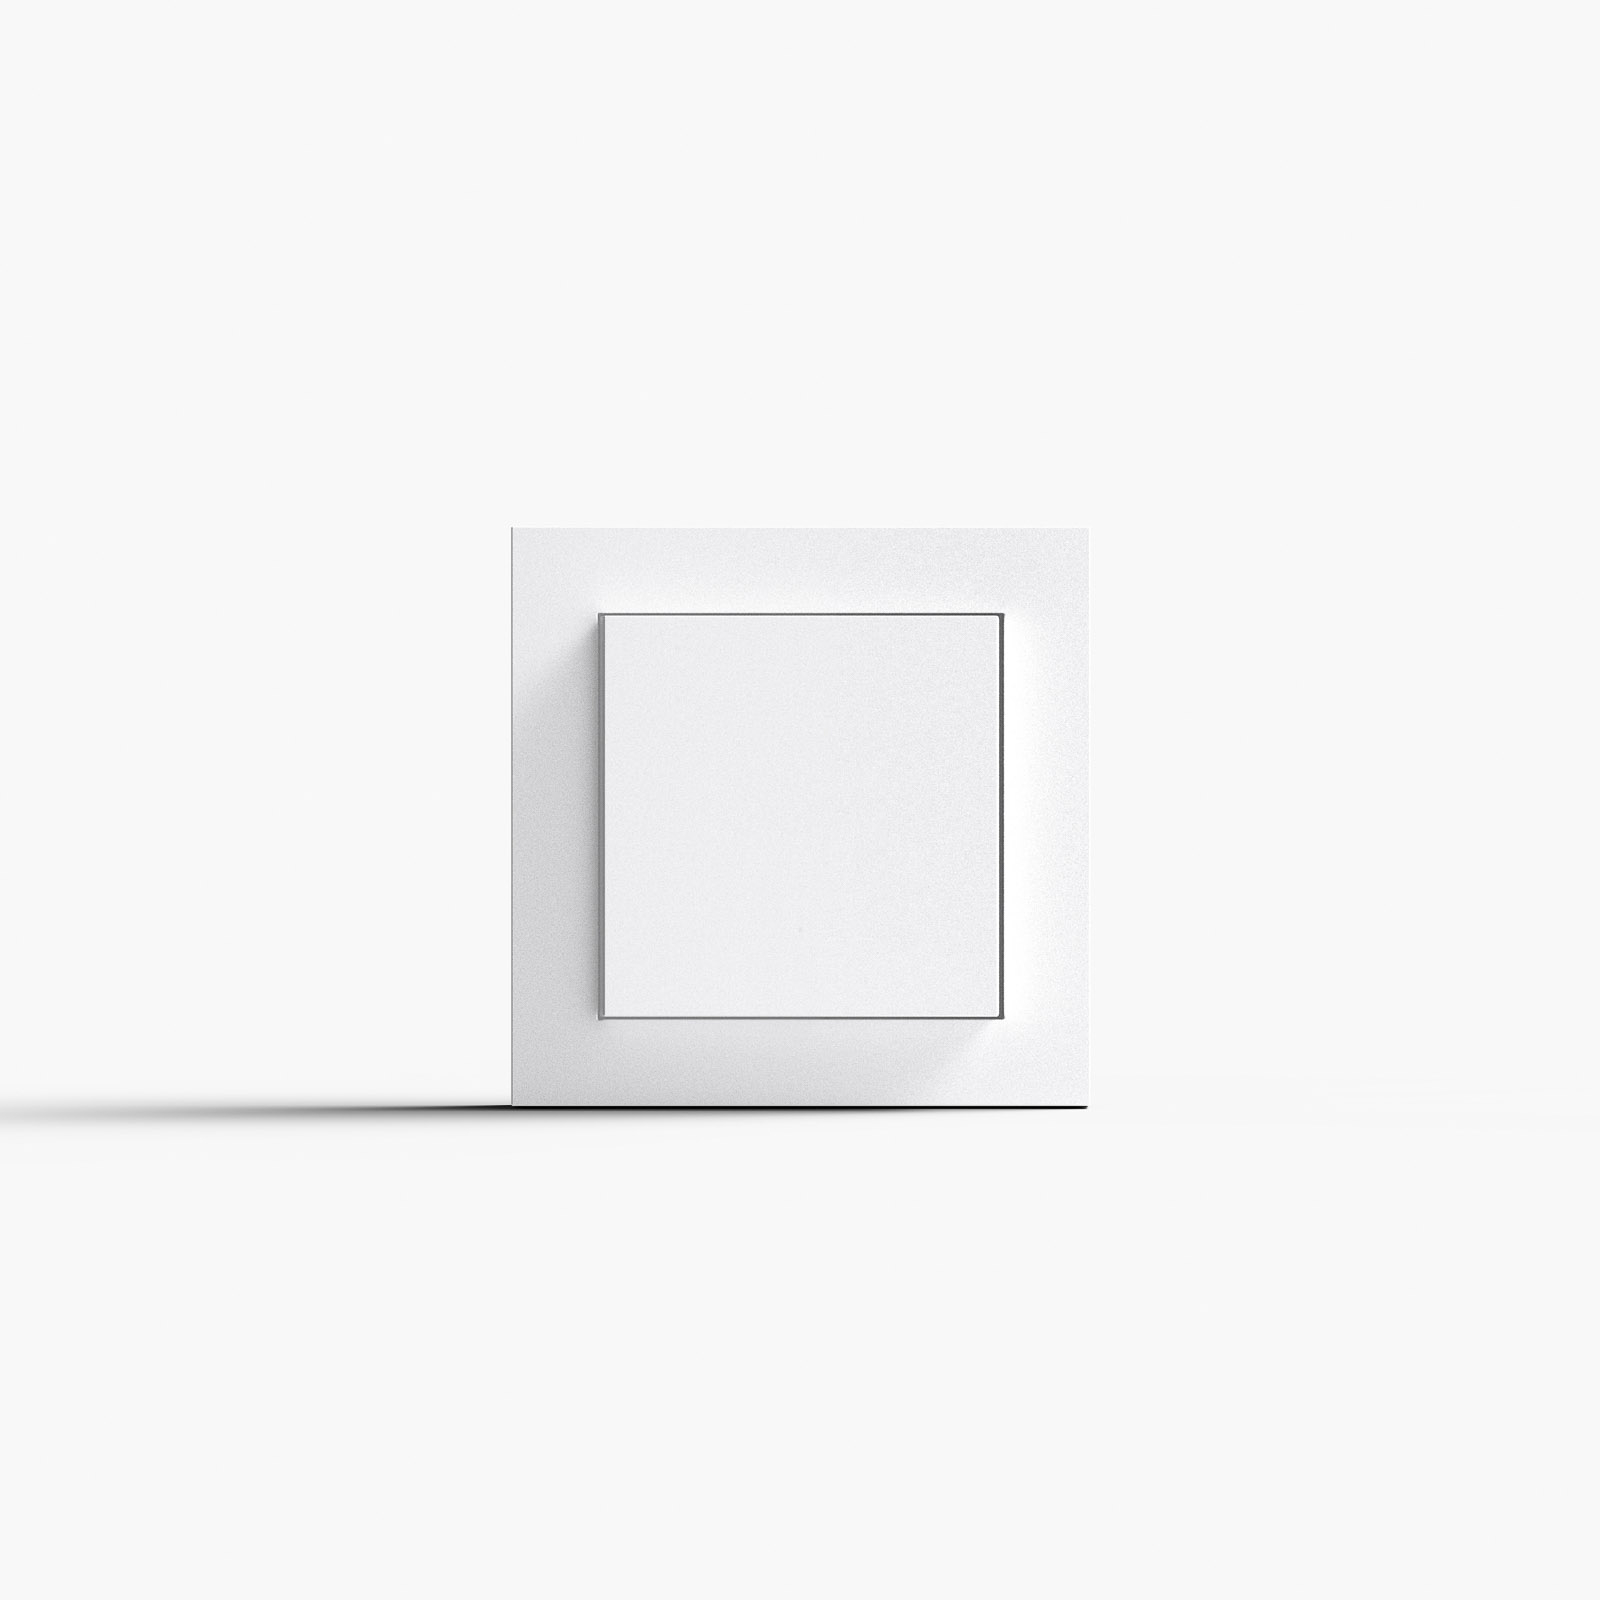 Senic Smart Switch Philips Hue 3-delig, wit glanzend